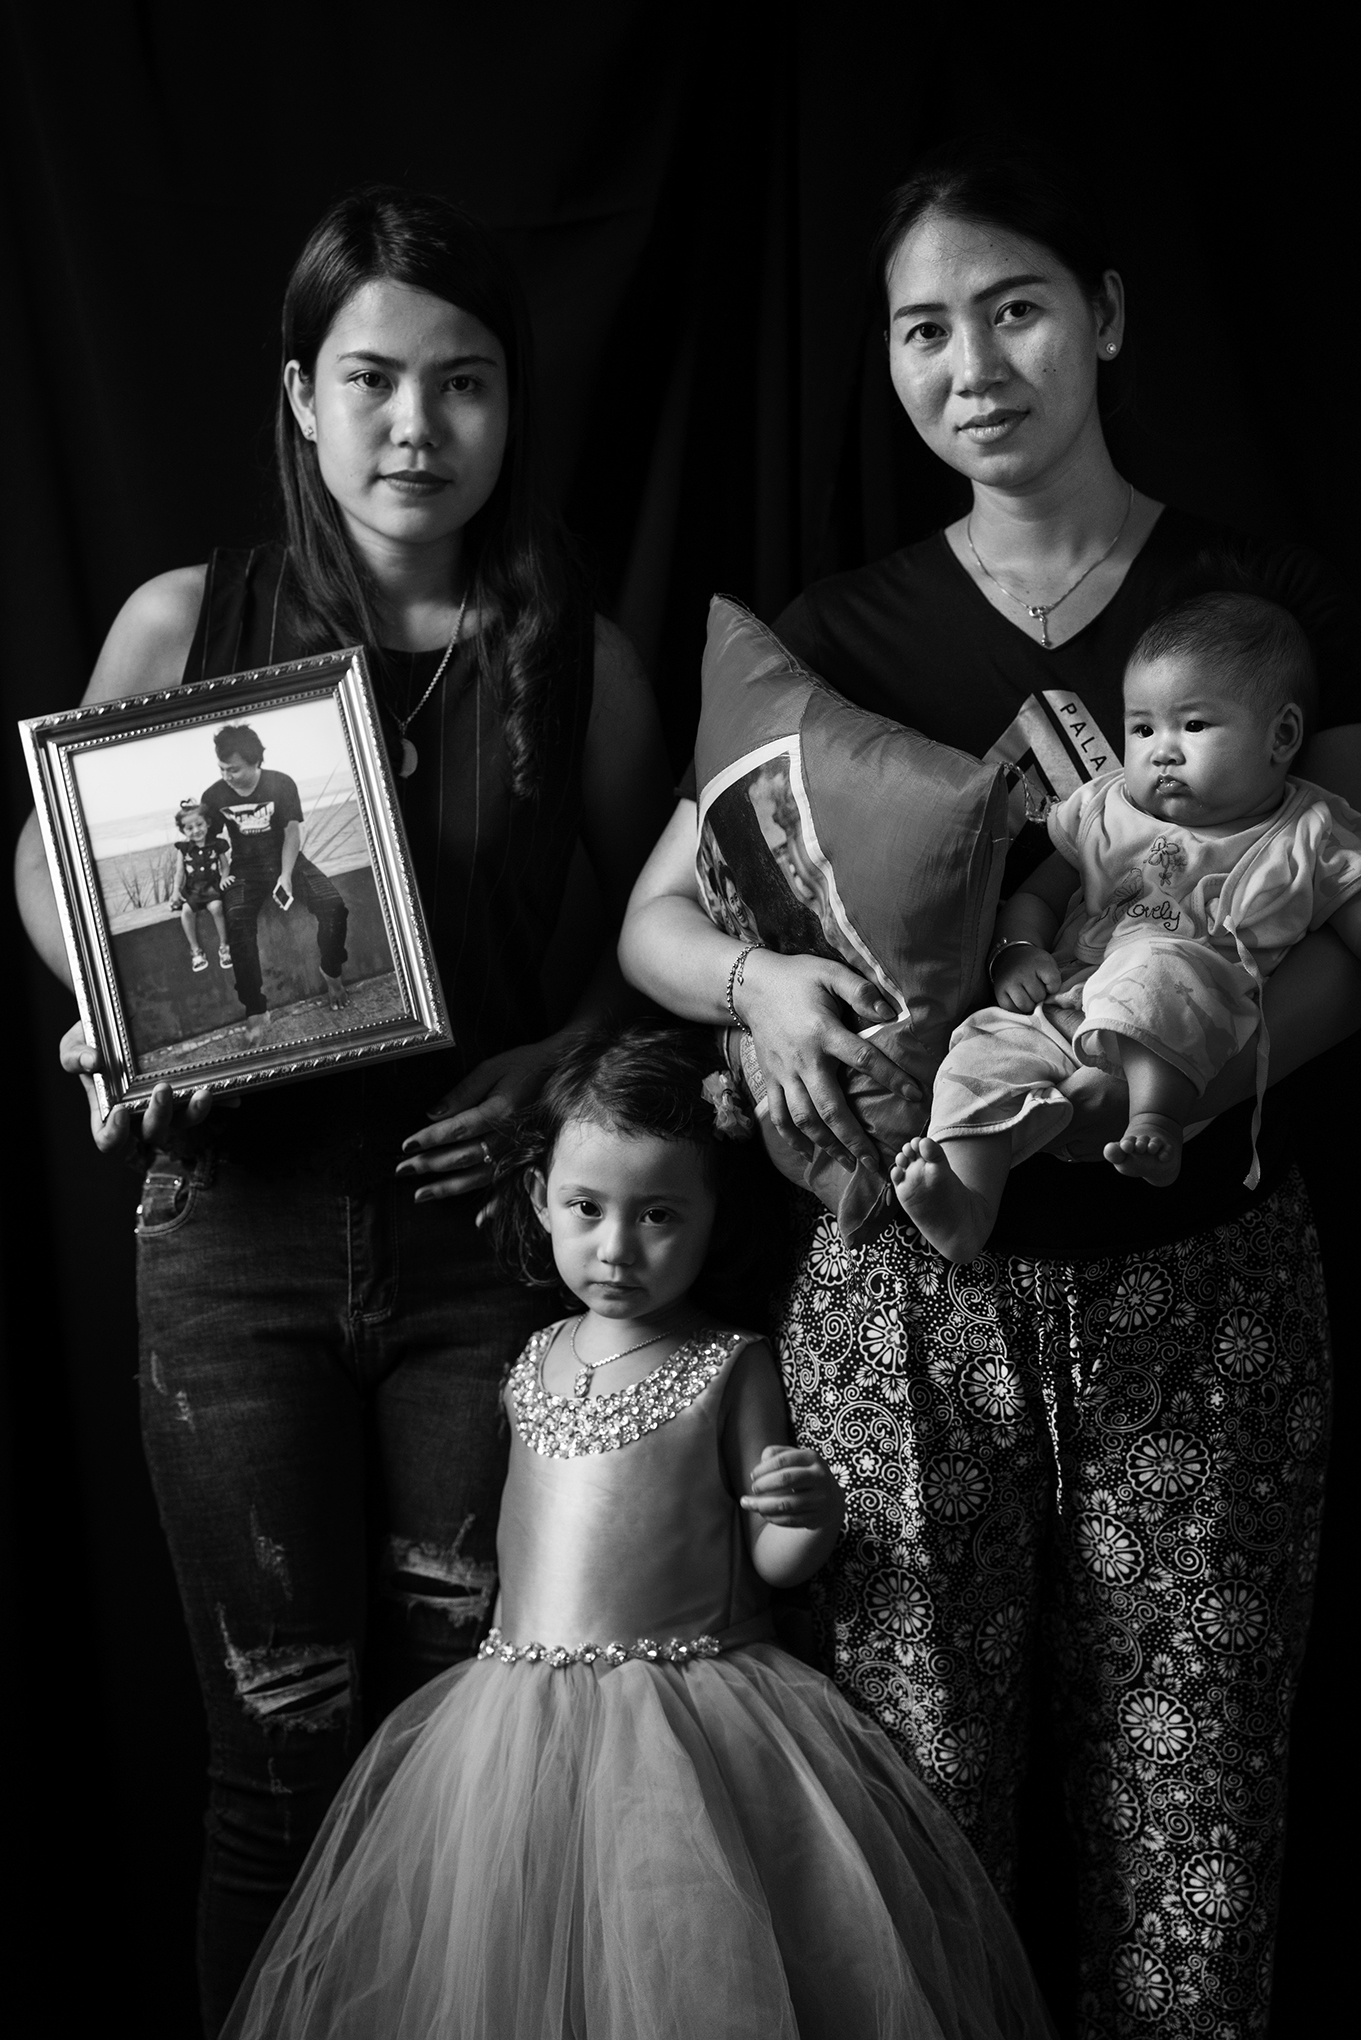 From left to right: Chit Su Win (Kyaw Soe Oo’s wife), Pan Ei Mon (Wa Lone’s wife), Thet Htar Angel (Wa Lone’s baby), Moe Thin Wai Zin (Kyaw Soe Oo’s daughter) in Pan Ei Mon’s home in Yangon, Myanmar on Dec. 3. (Moises Saman—Magnum Photos for TIME)